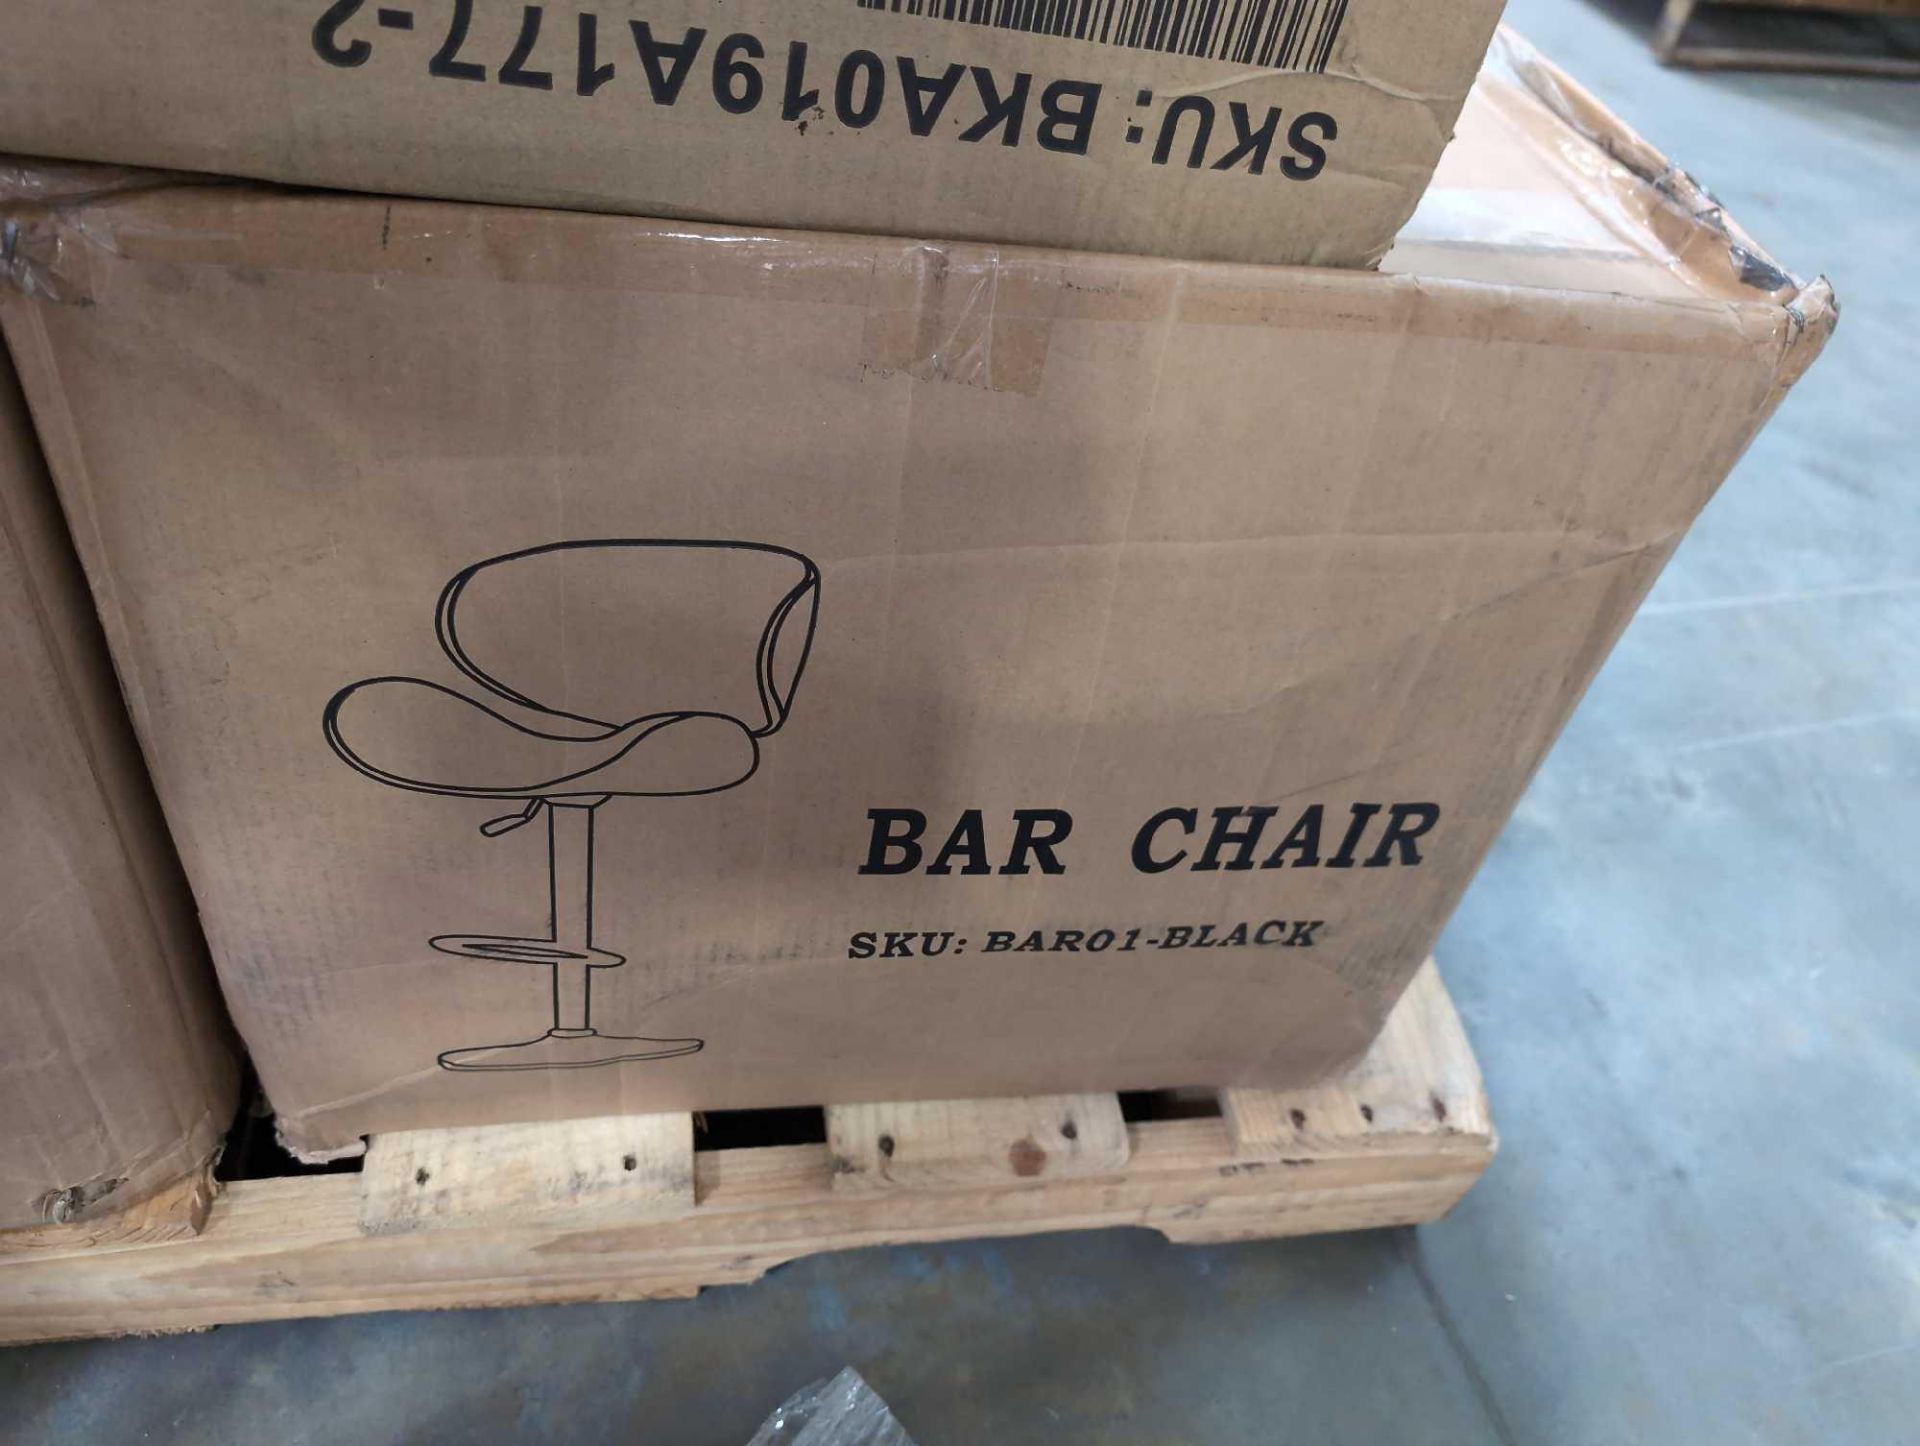 Chairs, Bar stool, bar Chair, box Filters - Image 4 of 7